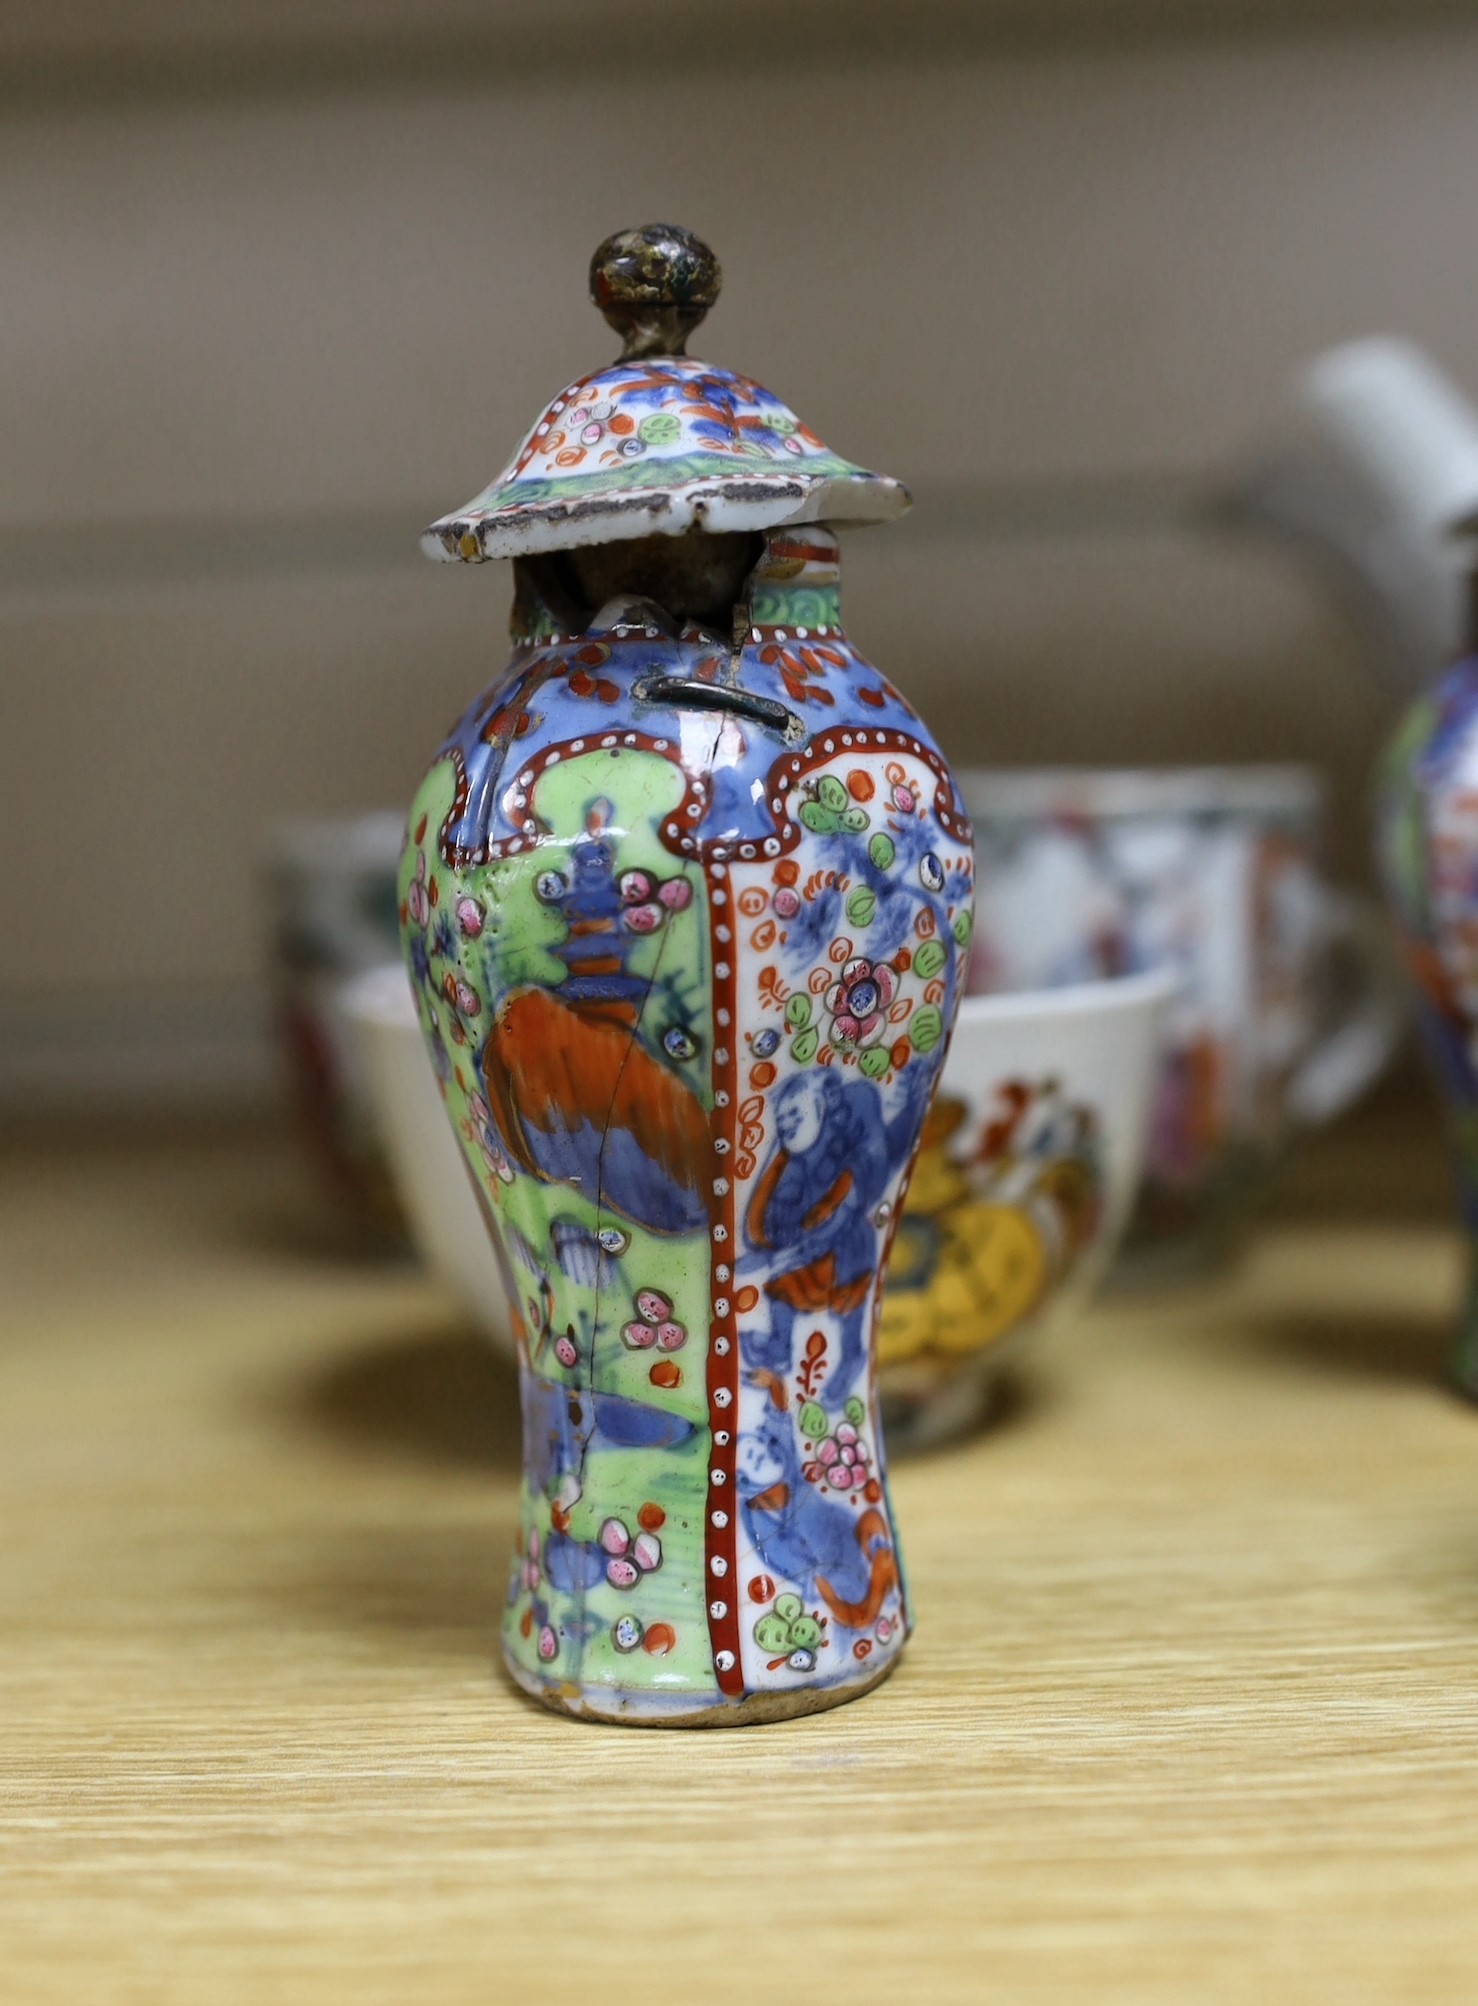 A collection of mixed Chinese export tableware, 18th century and later